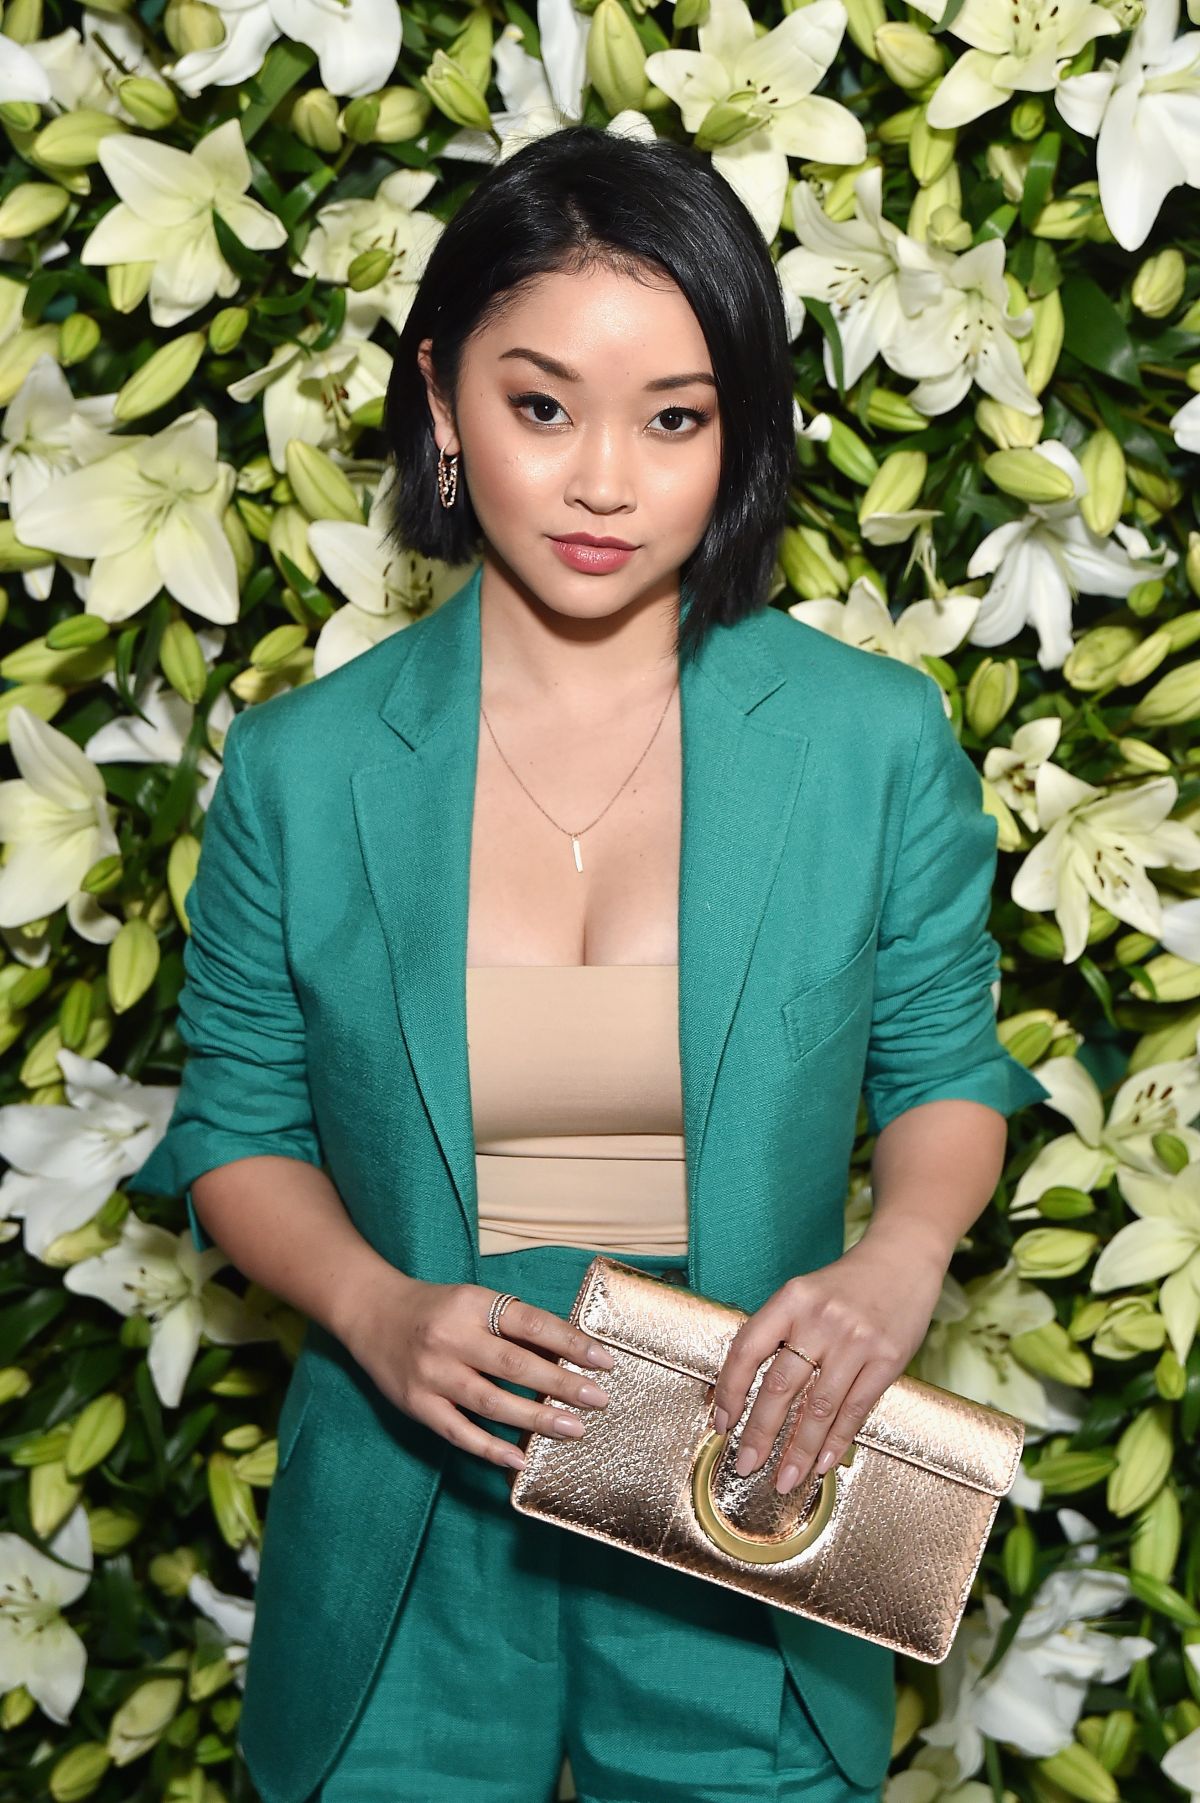 Lana Condor At Wsj Magazine Talents And Legends Dinner In Beverly Hills 01 28 2019 Hawtcelebs